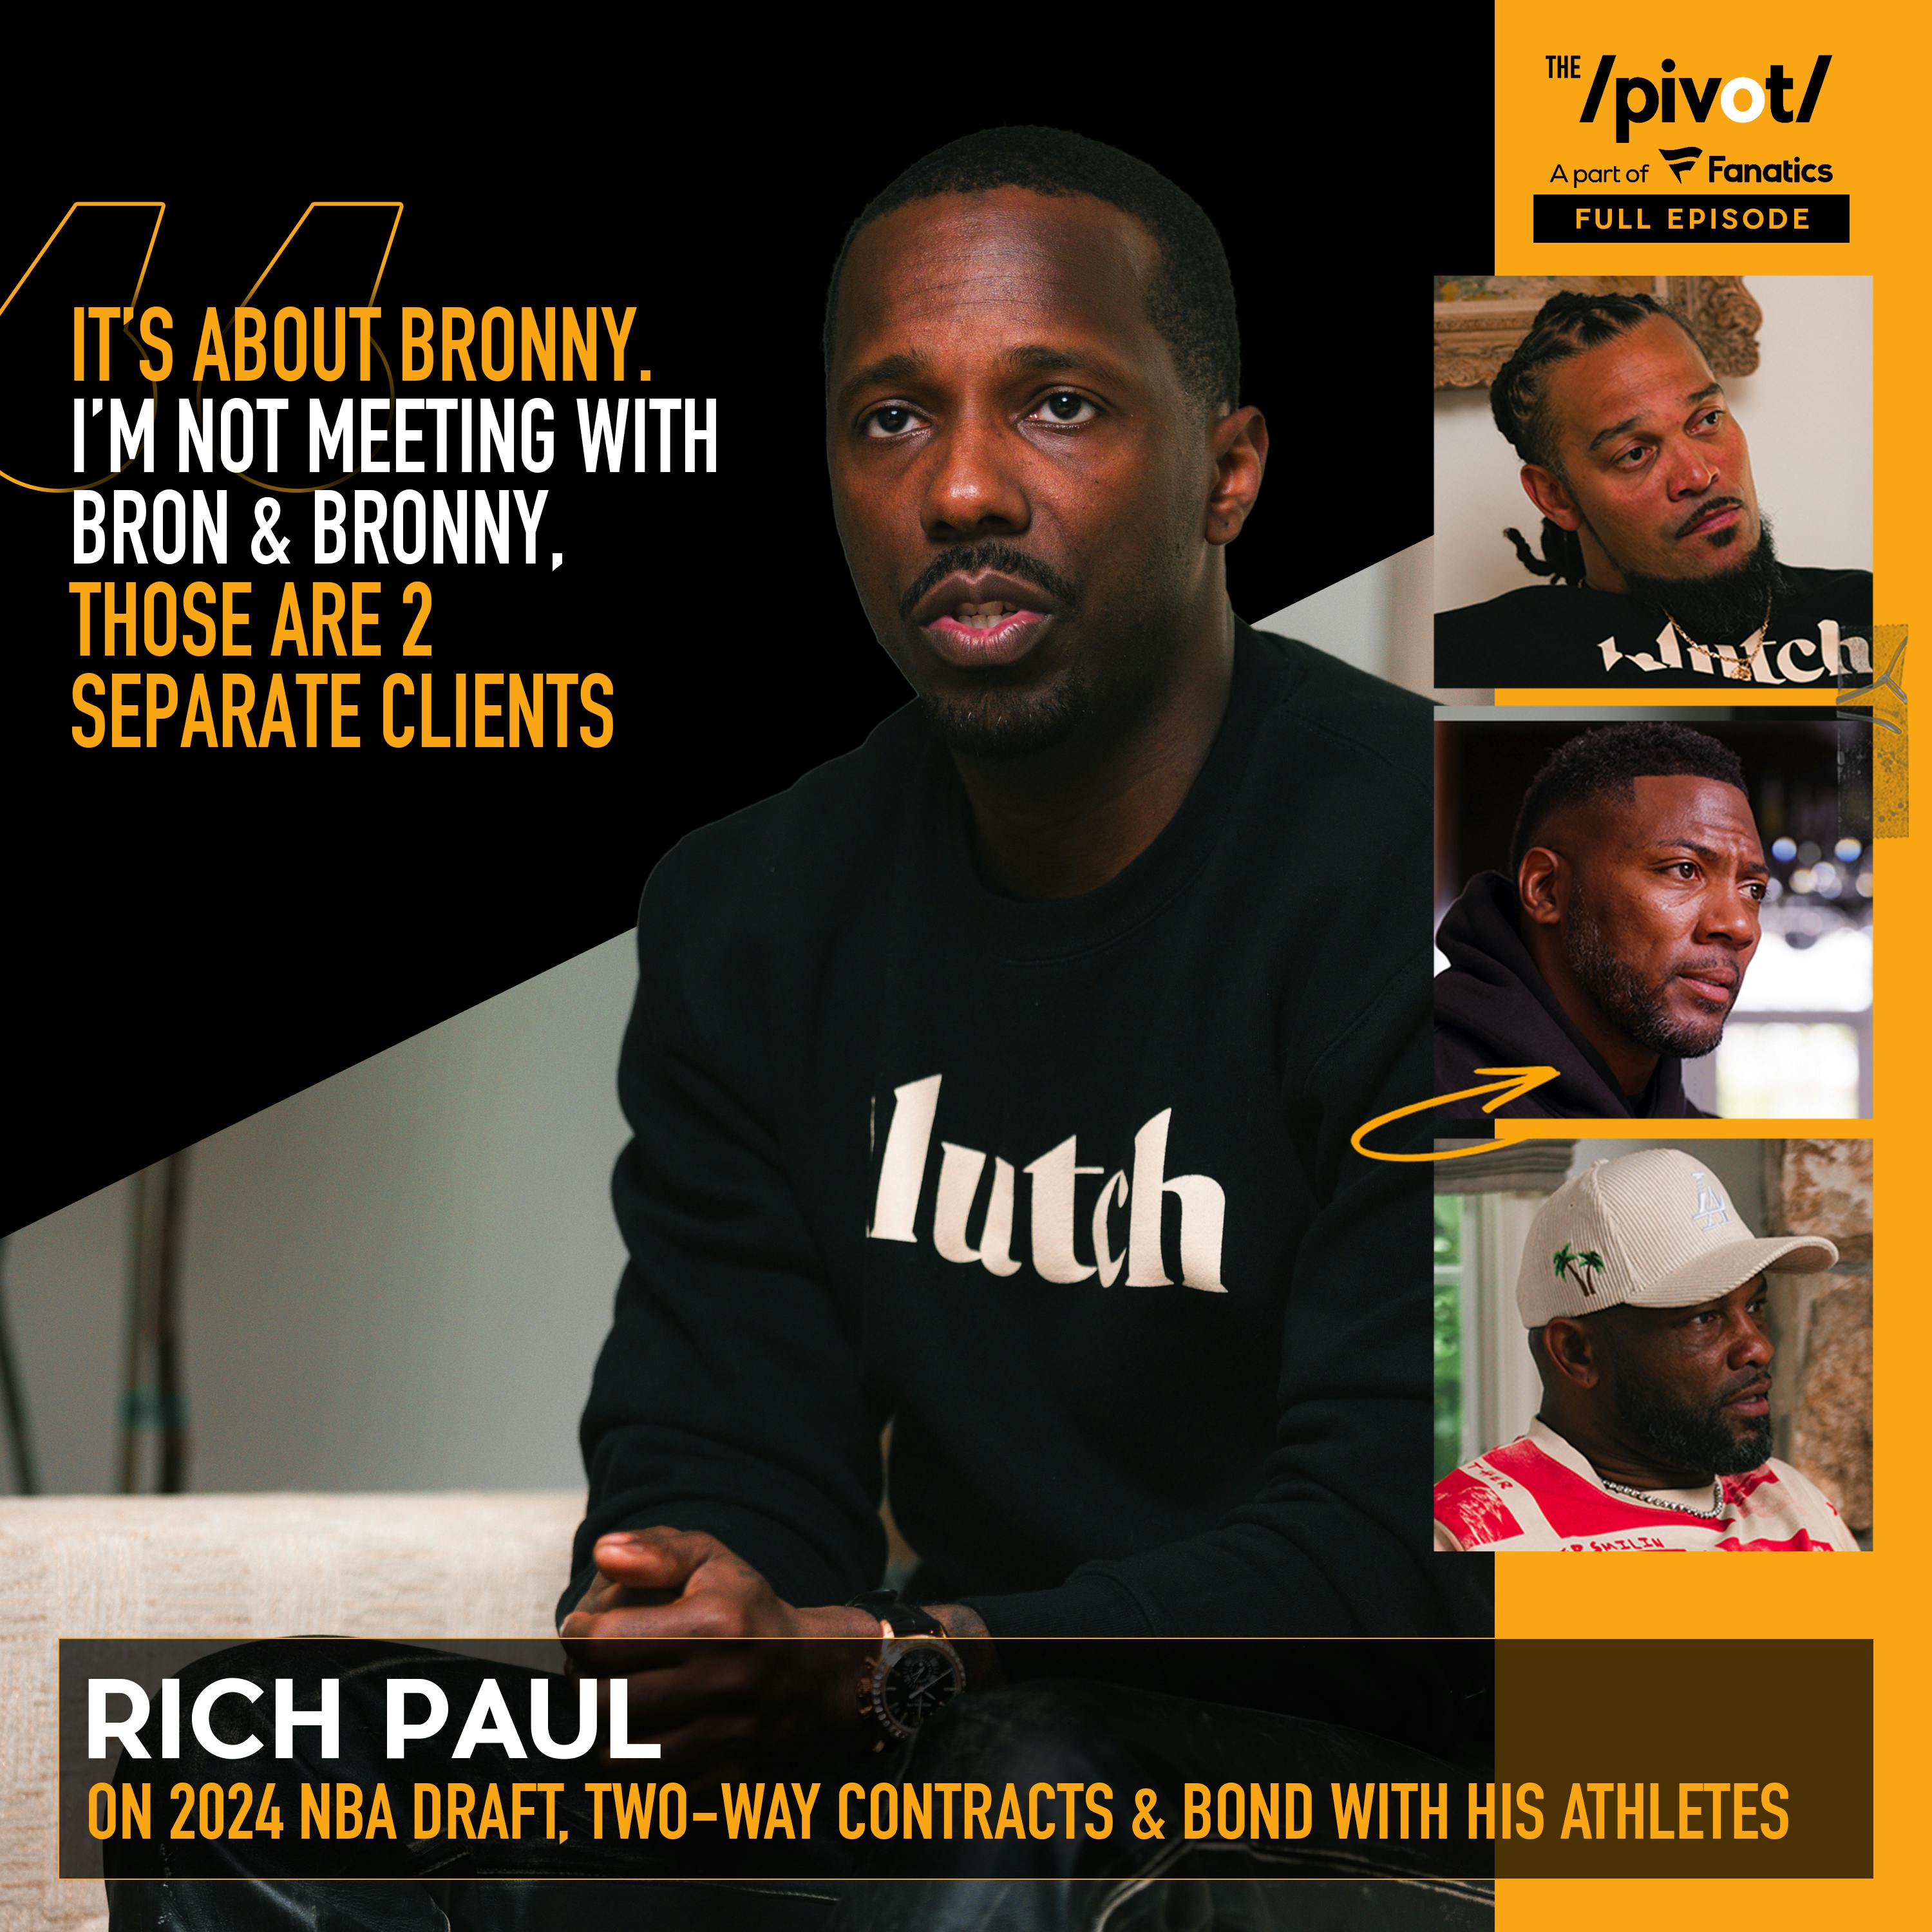 Rich Paul: On earning reputation of most powerful non-owner in NBA, talks building sports & media empire from ground up, bond with Lebron James, Draymond Green, Anthony Davis, two-way contracts & Bron